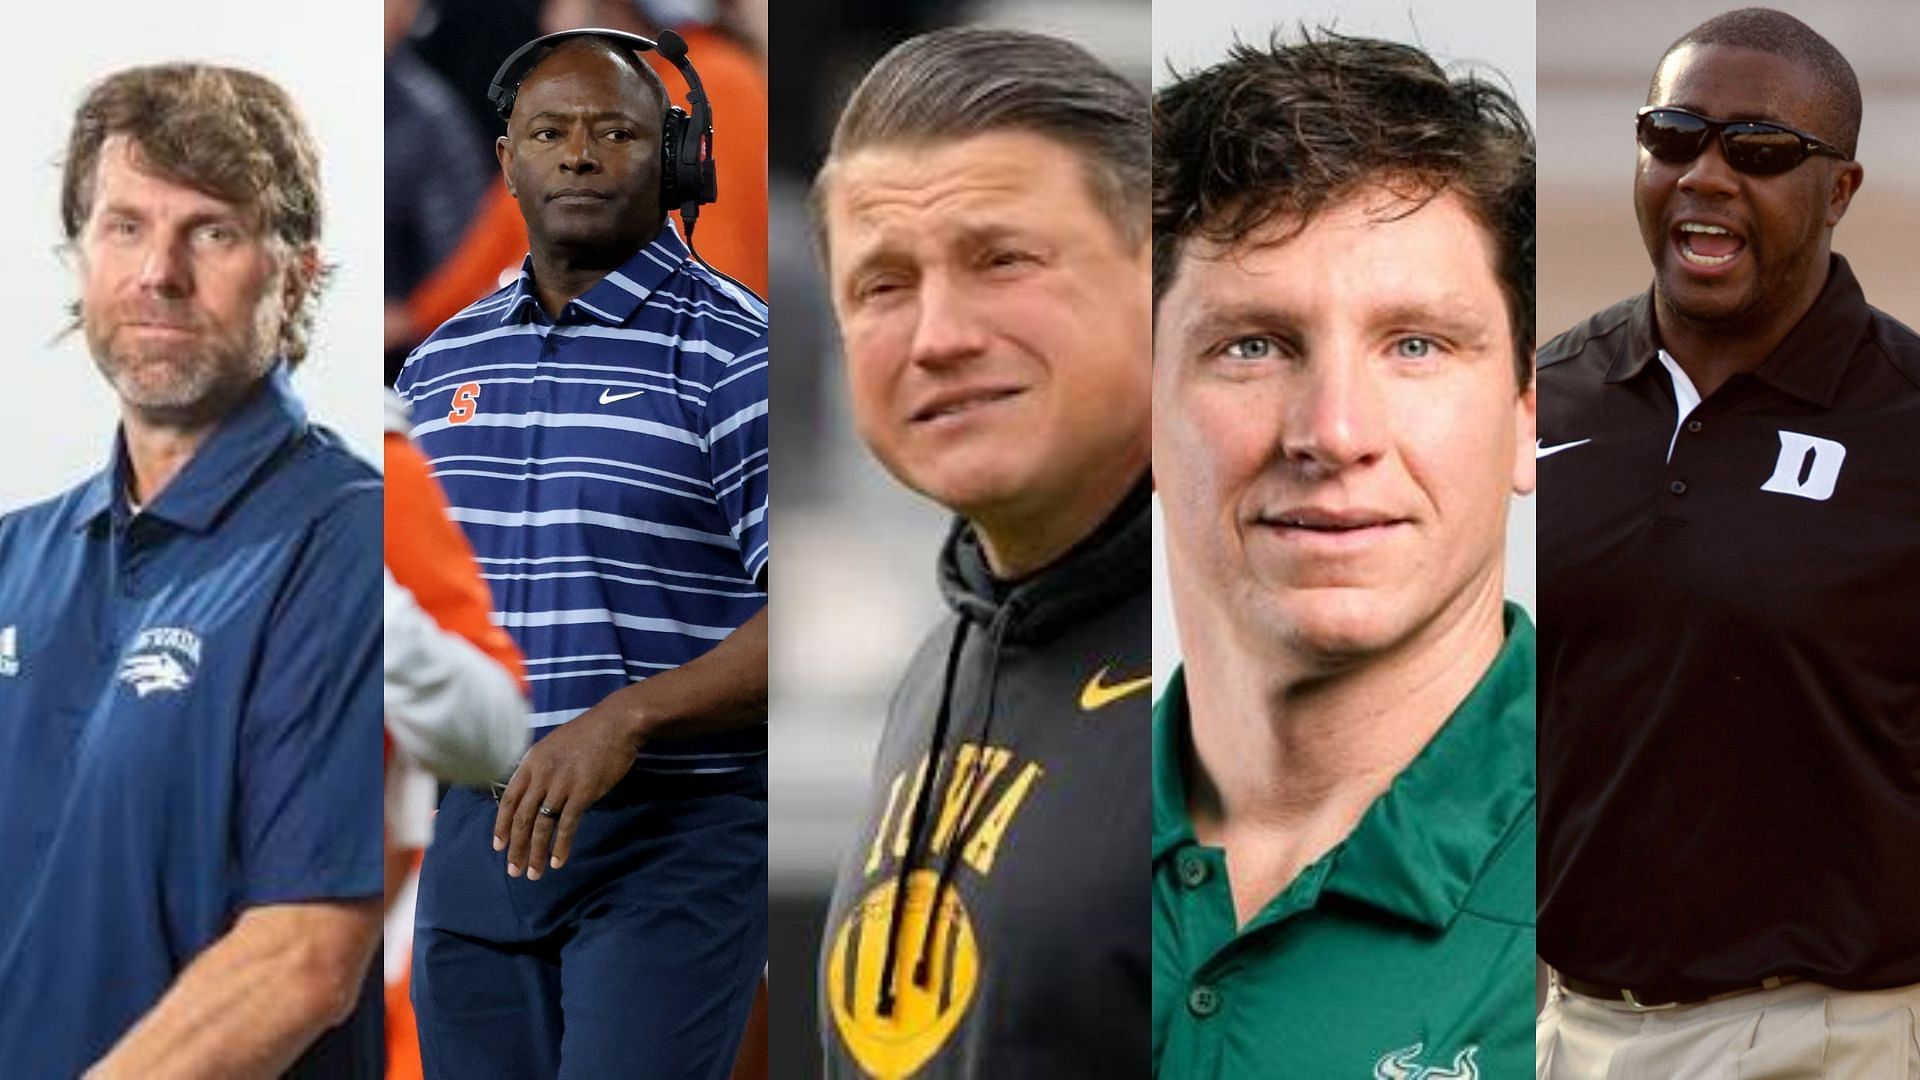 Will any of these men be Donnie Kirkpatrick replacements for East Carolina?